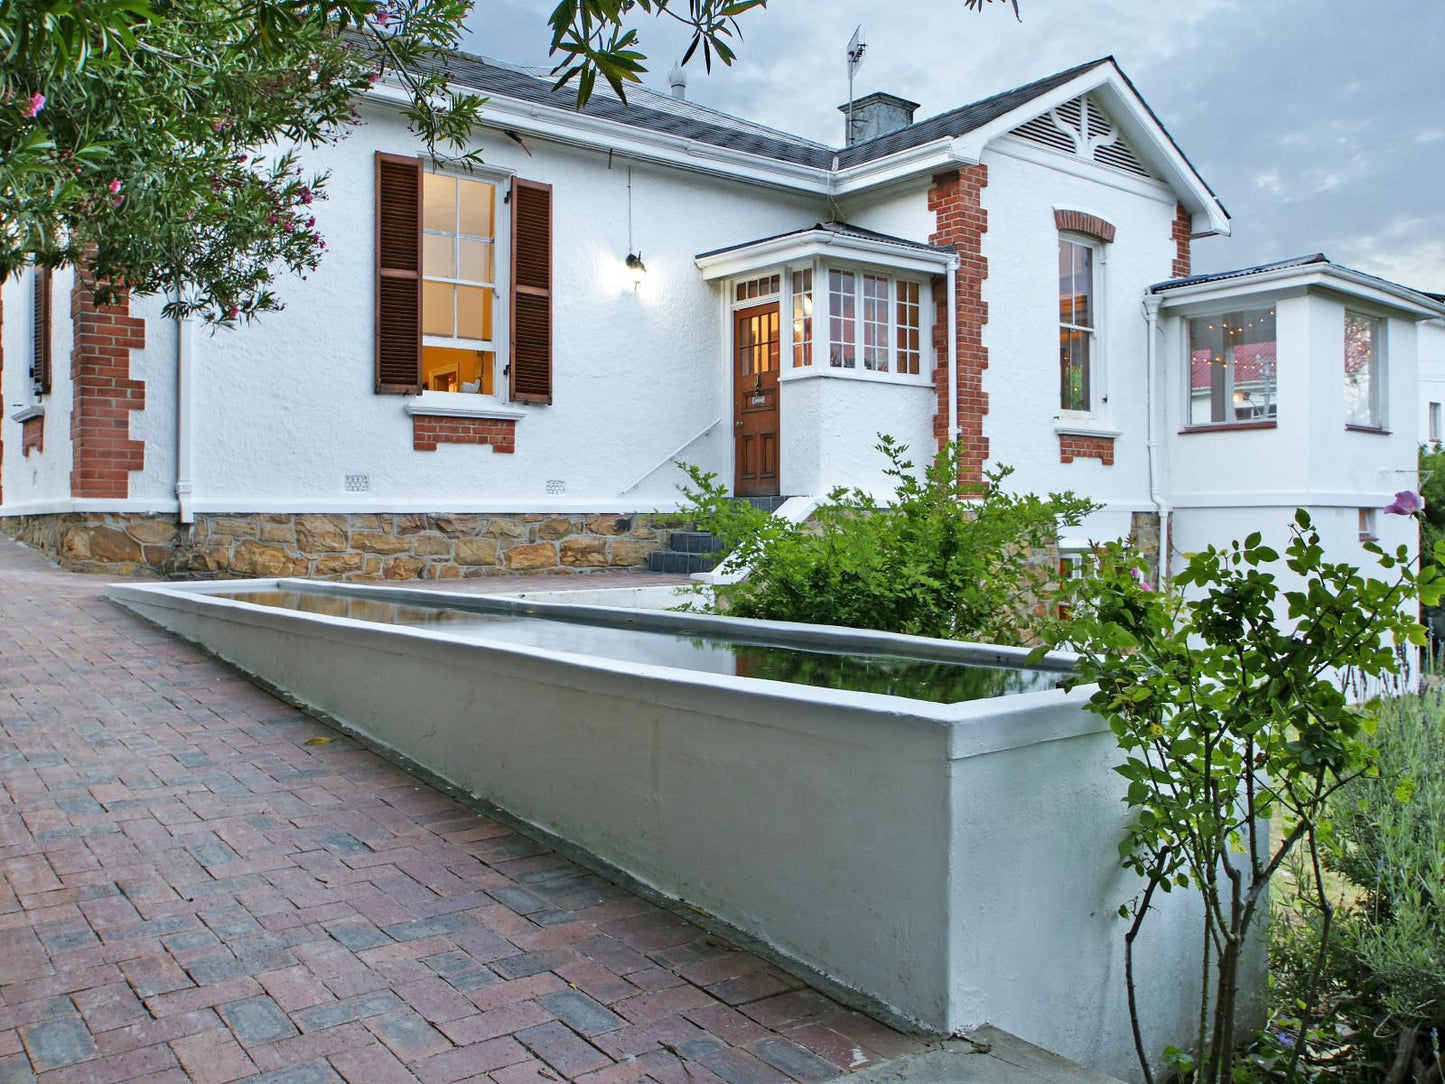 Inawestays Cottages Gardens Cape Town Western Cape South Africa House, Building, Architecture